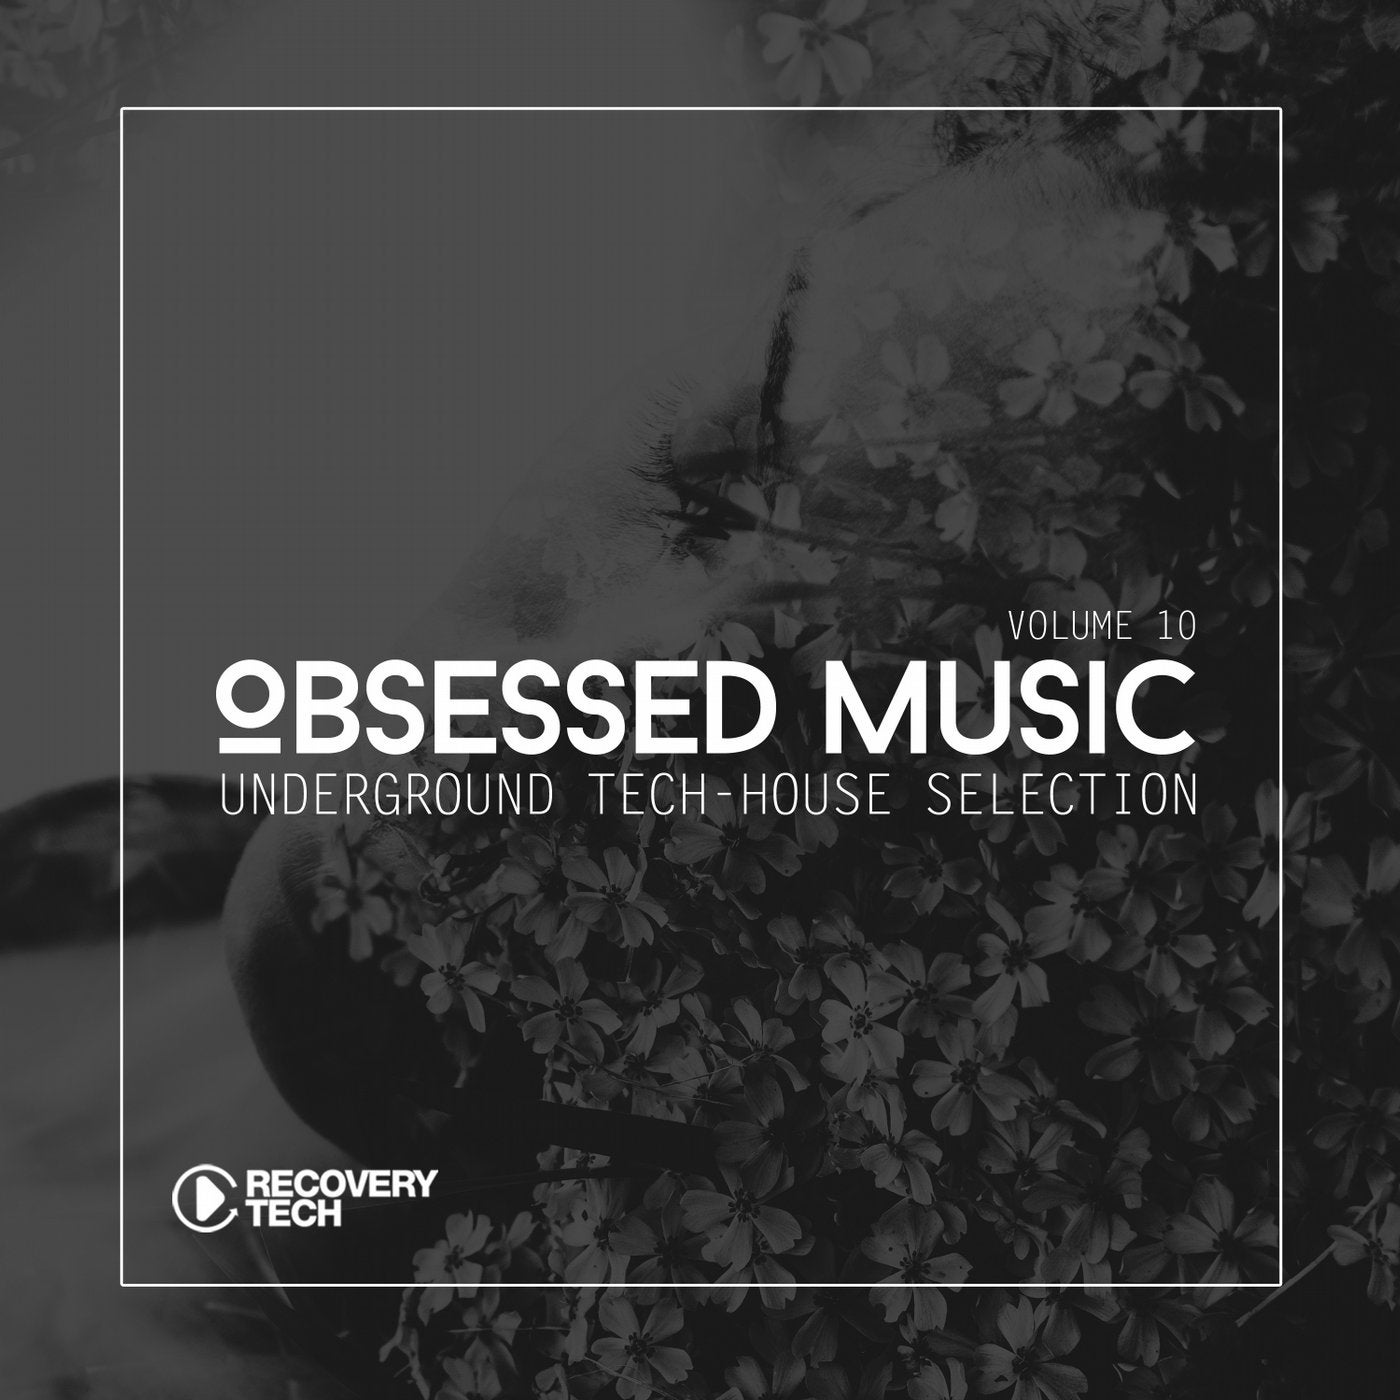 Obsessed Music Vol. 10